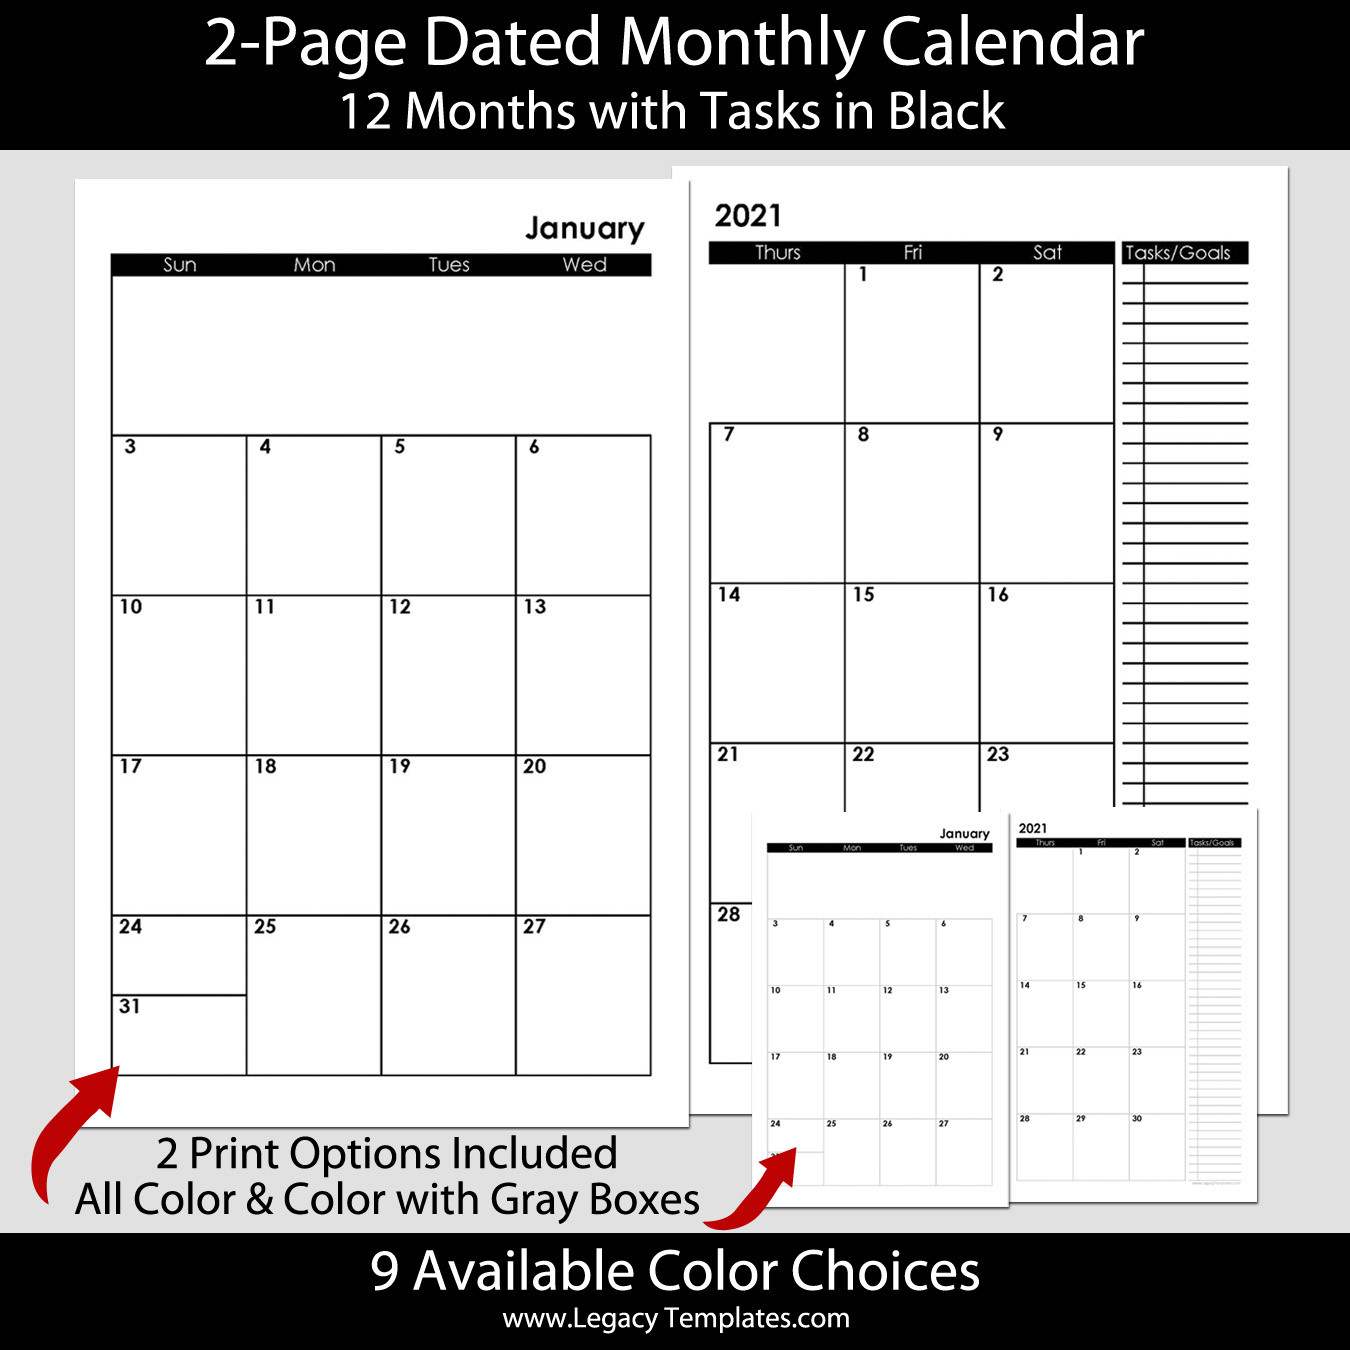 2-Page Dated Monthly Calendar In Black 5.5 X 8.5 | Legacy-4 4 5 Calendar Template